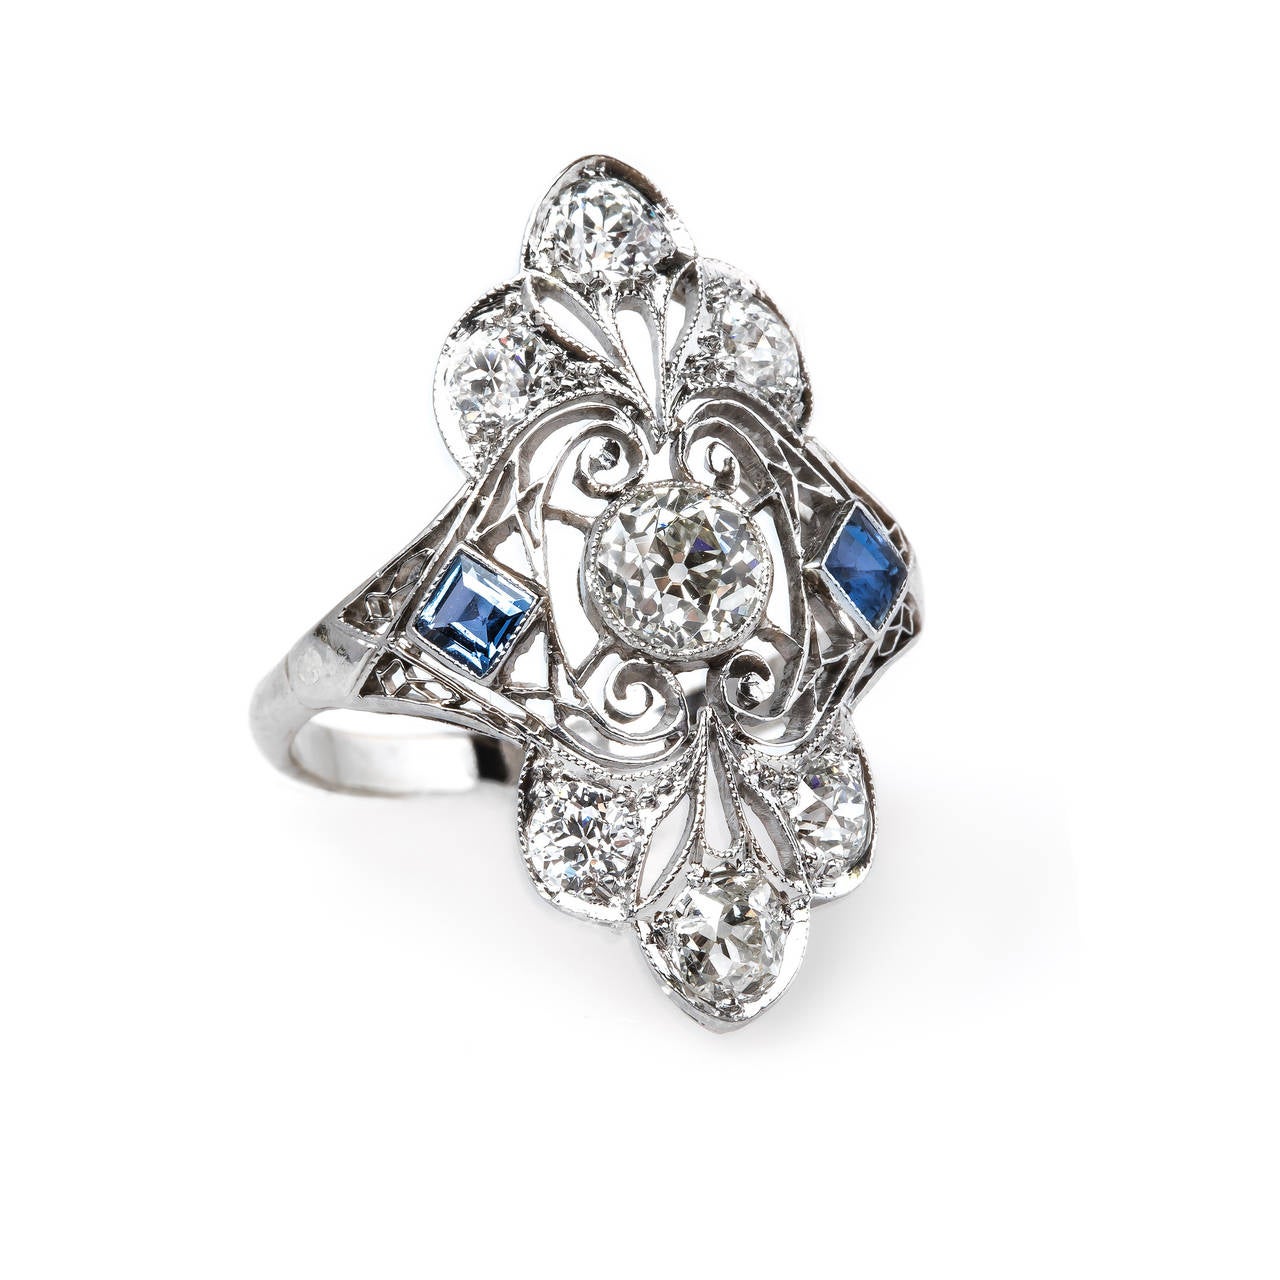 Pacific Grove is an ornate Edwardian era (circa 1915) platinum and 14k white gold ring centering a stunning bezel set 0.53ct EGL certified Old European Cut diamond graded K color and VS1 clarity. This beautifully crafted navette style ring is